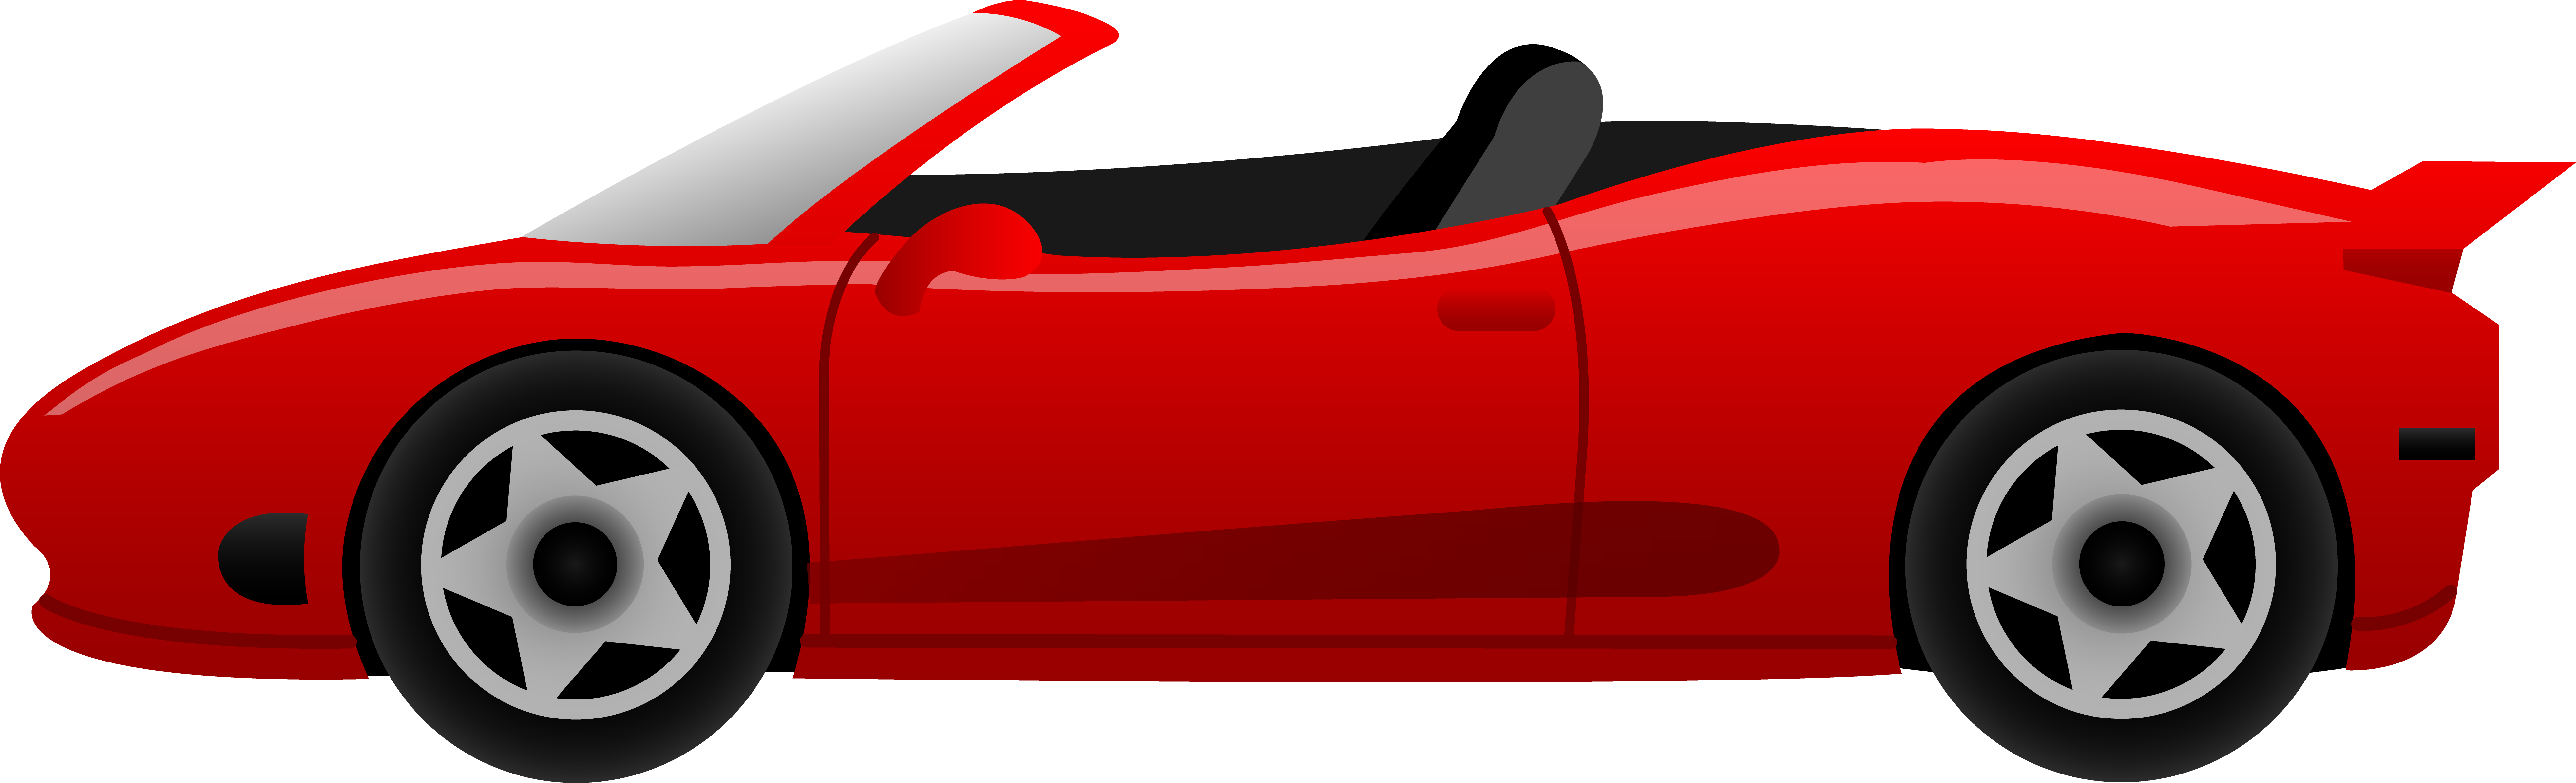 car clipart side view - photo #2